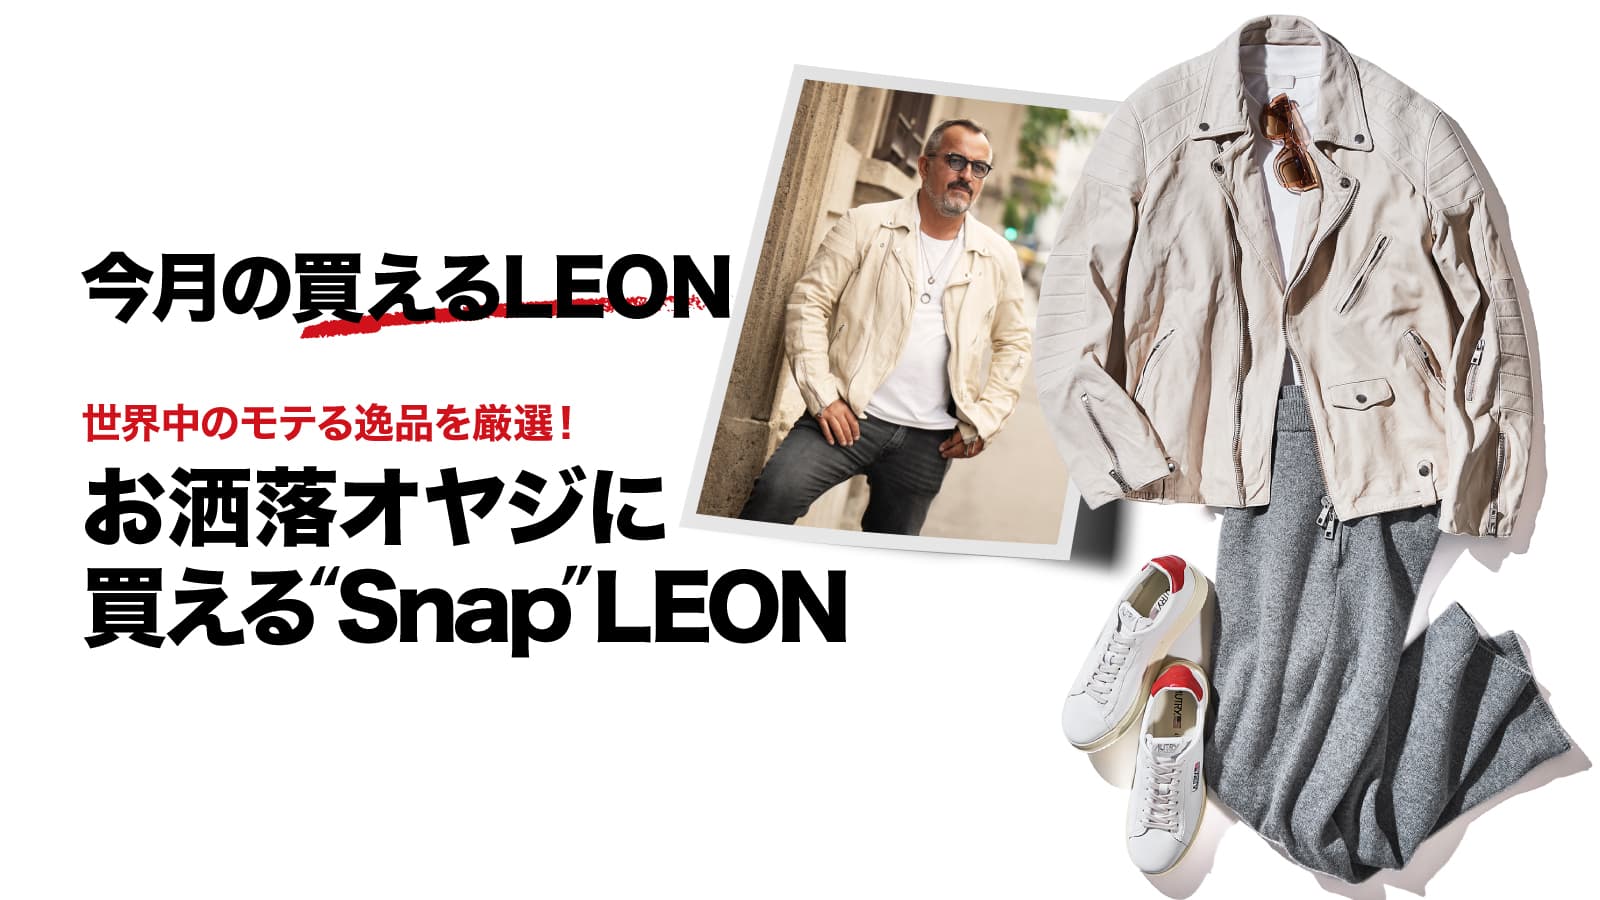 A snapleon that stylish old men can buy